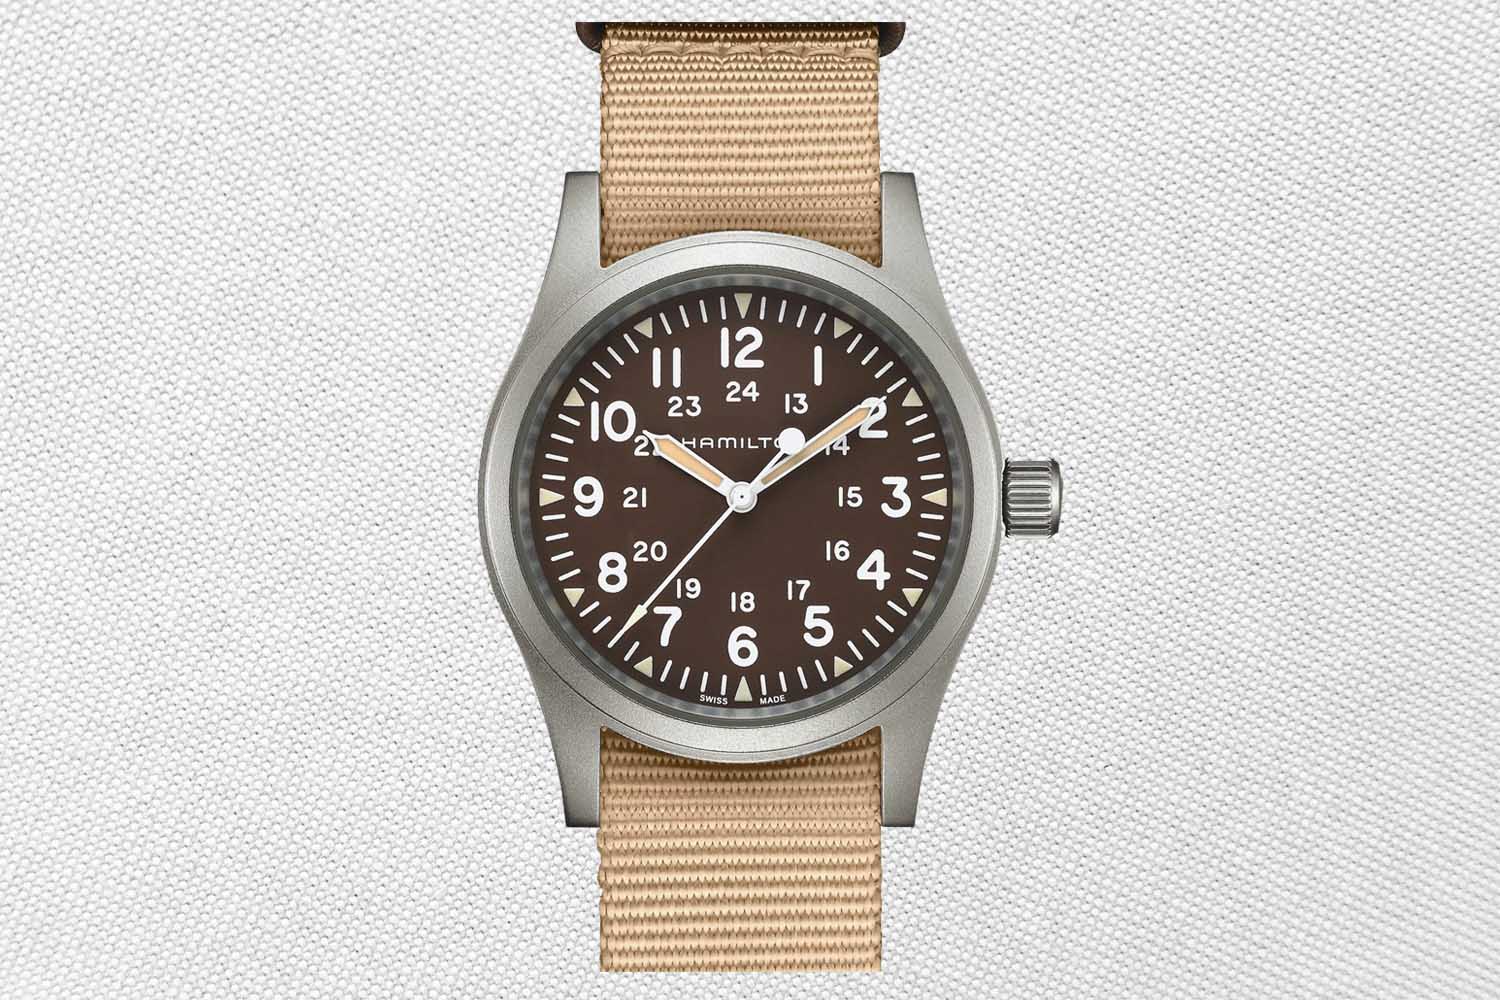 Hamilton Khaki Field Mechanical, one of the best watches under $1,000